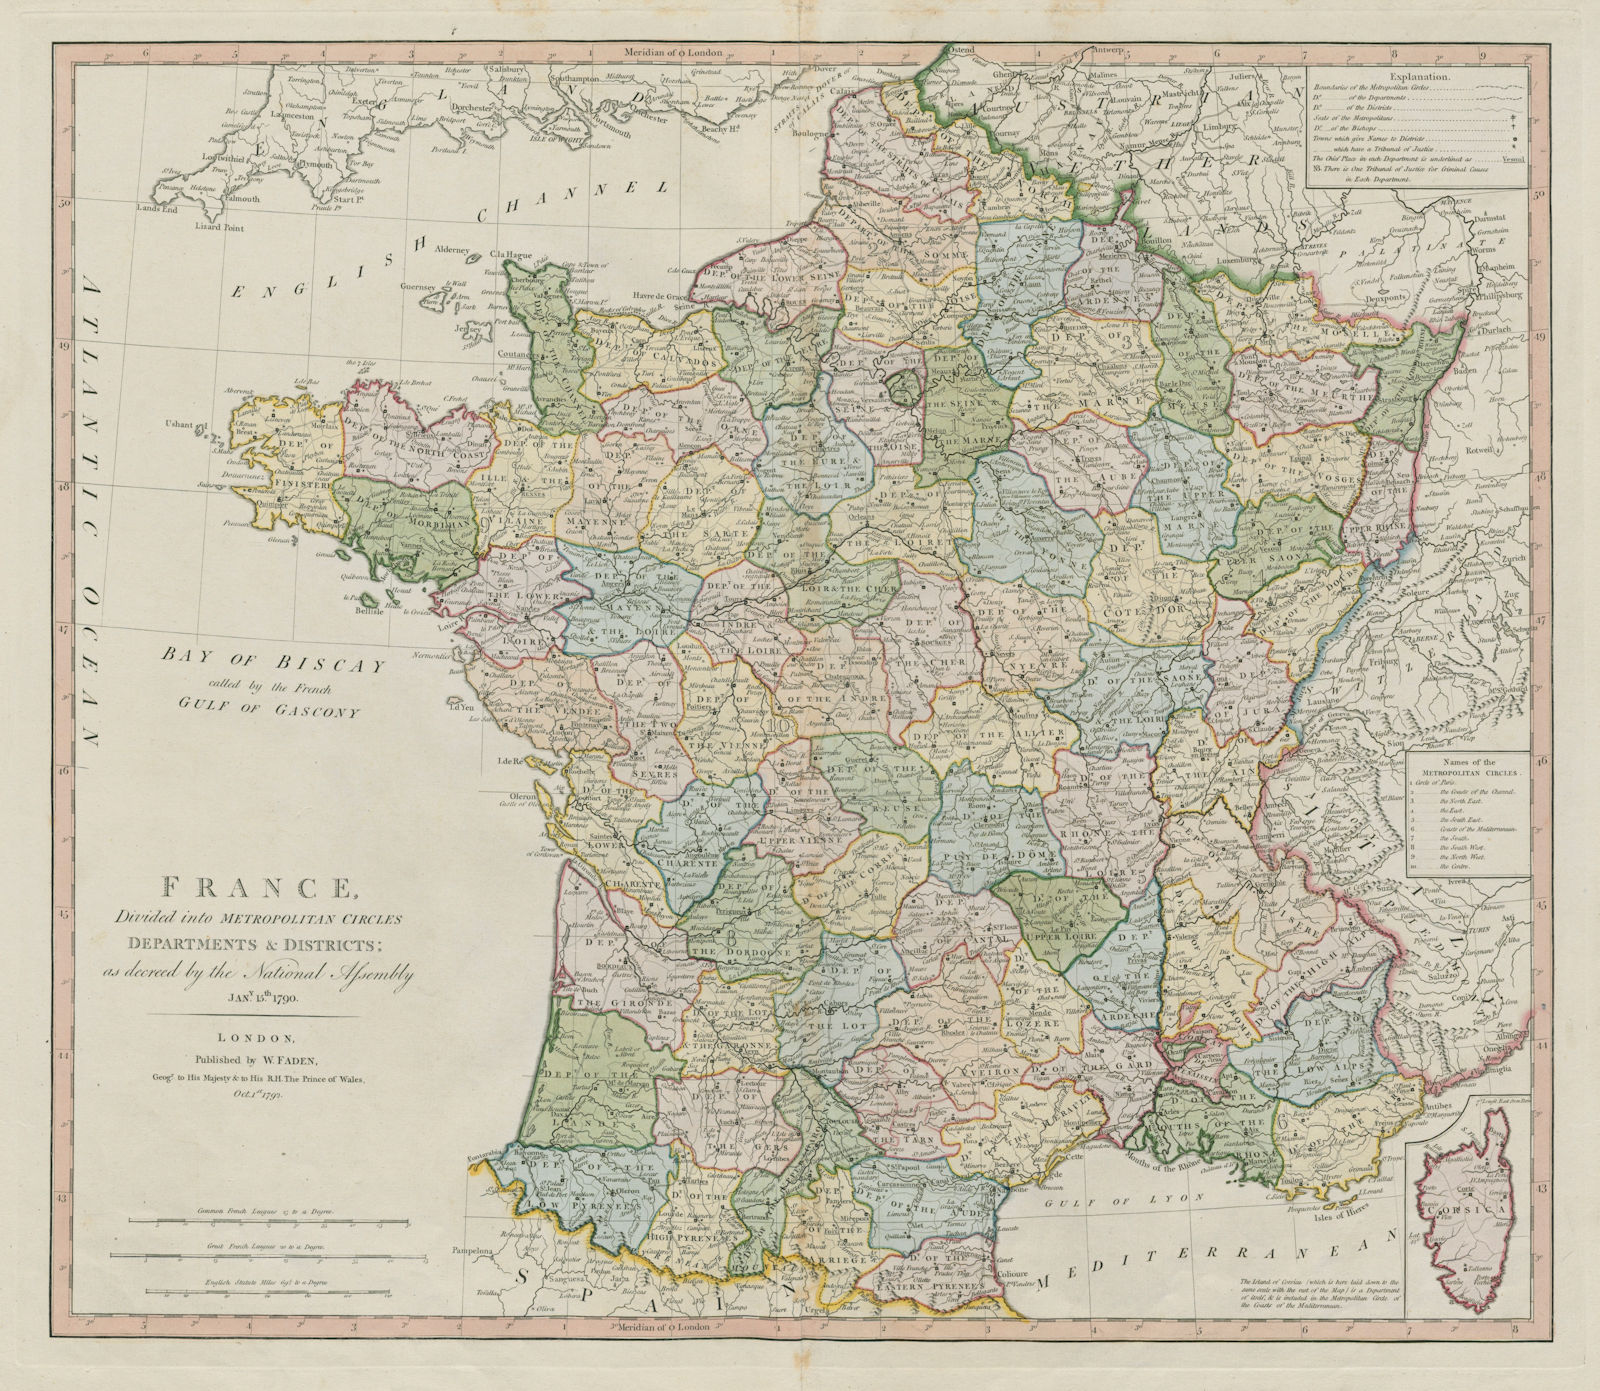 France divided into Metropolitan Circles, Departments & Districts FADEN 1792 map